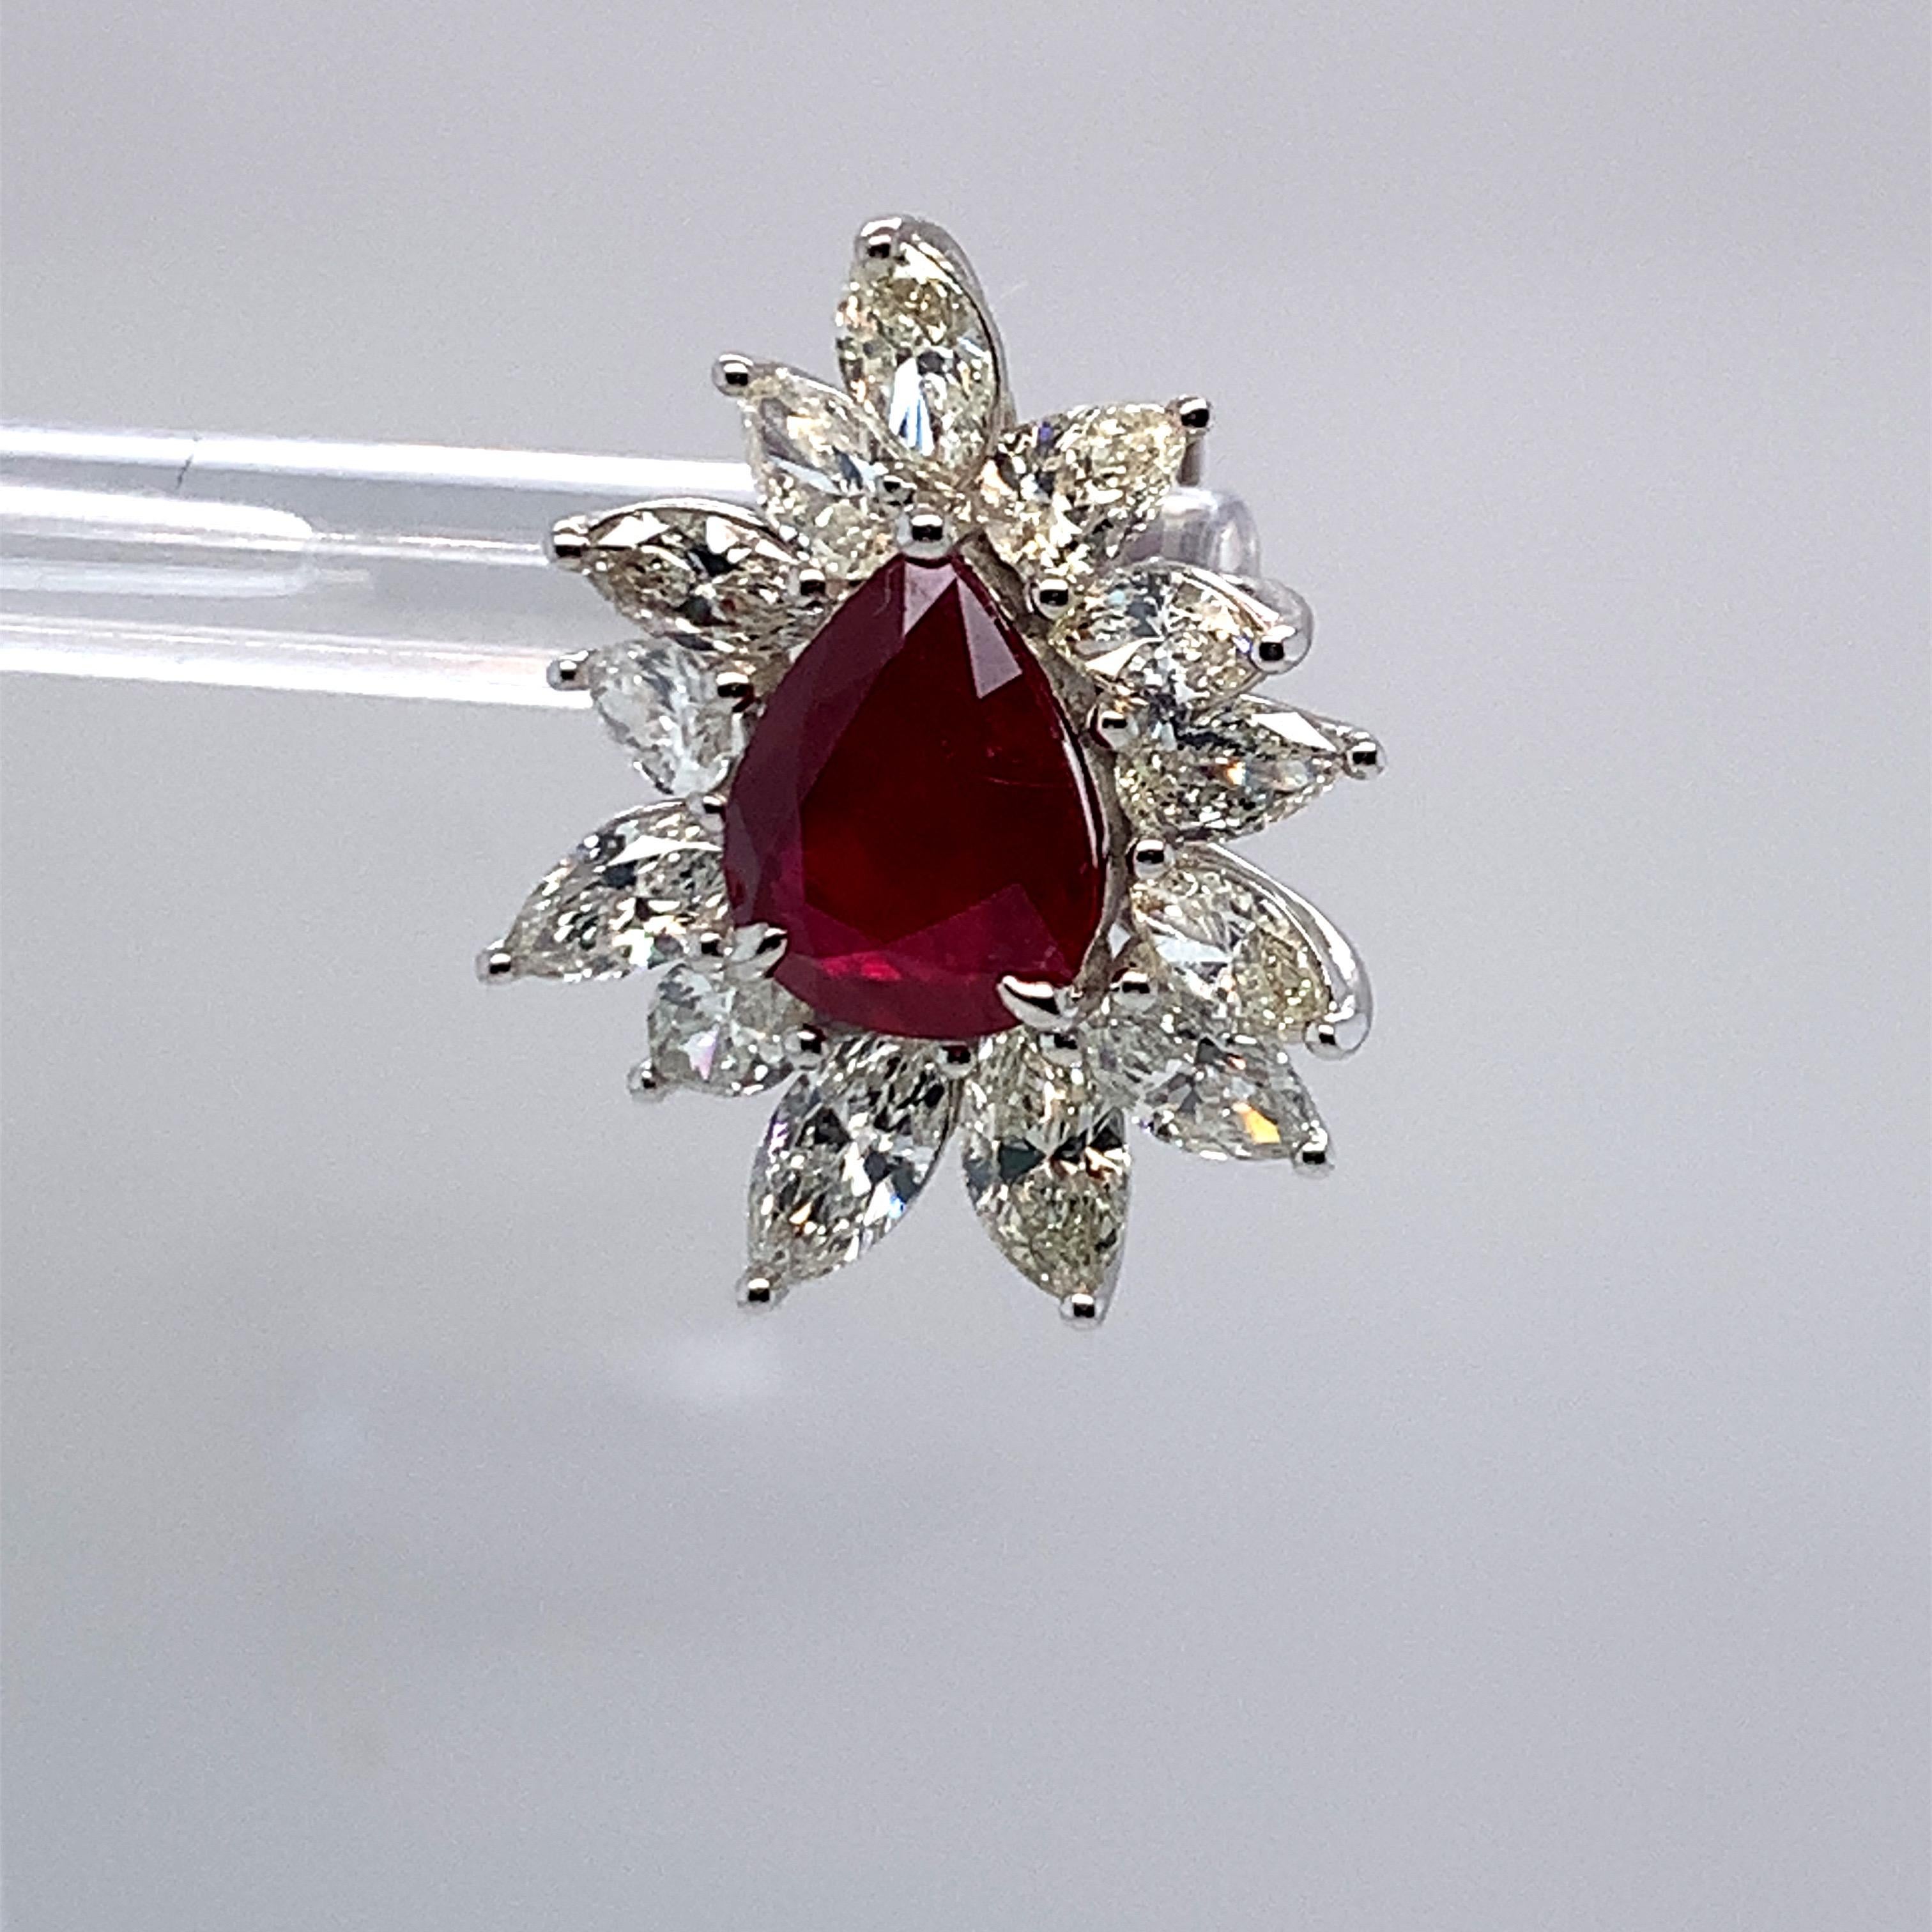 This magnificent stud earrings has pear shaped ruby in center which is framed by white diamonds. Combination of pigeon blood ruby and white diamonds set in white gold makes it a stunning piece. Carefully finished with hand by skilled artisans.
Ruby: